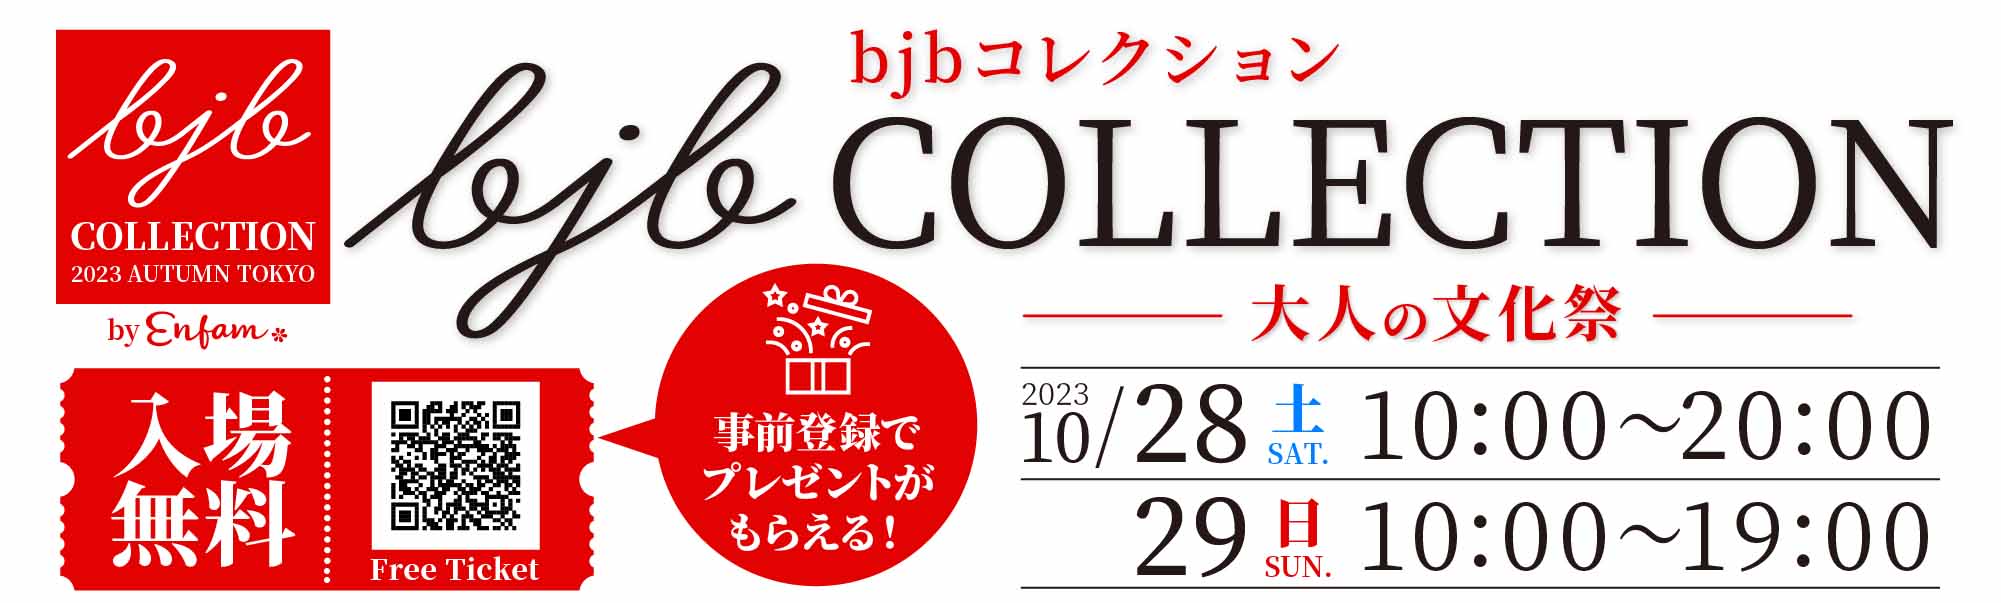 bjb collection